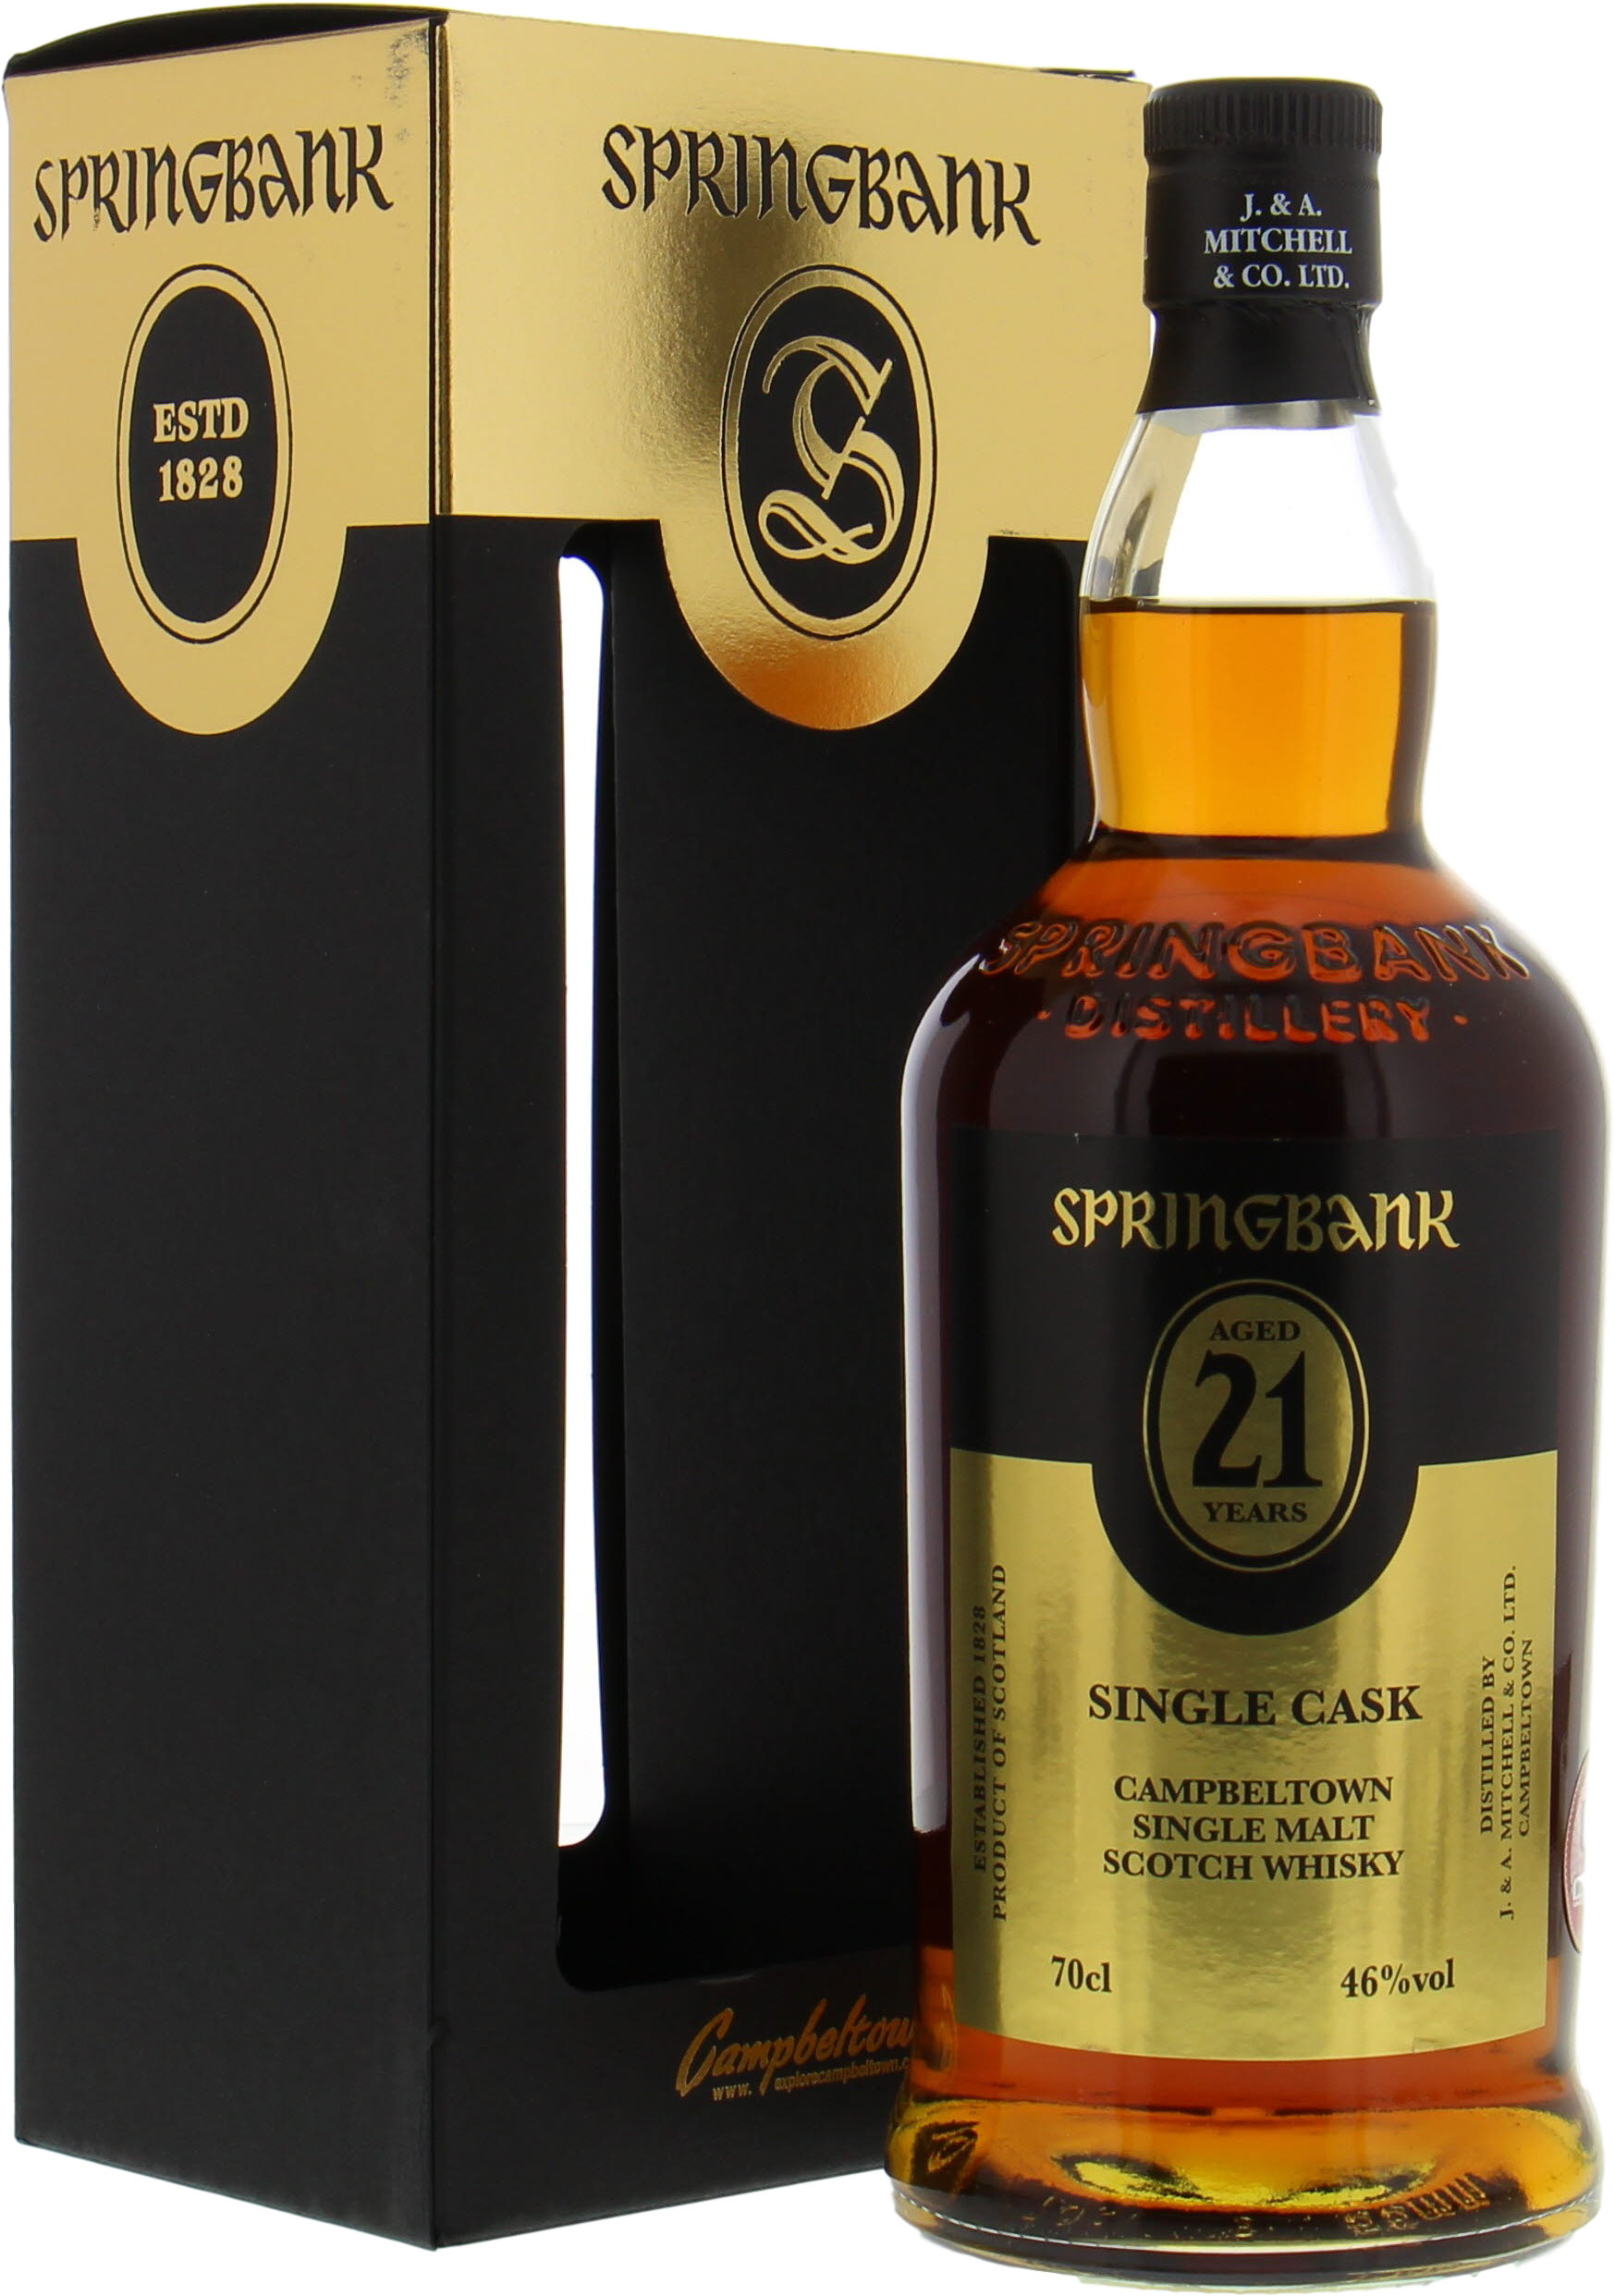 Springbank - Open Day 2018 21 Years Old 46% NV